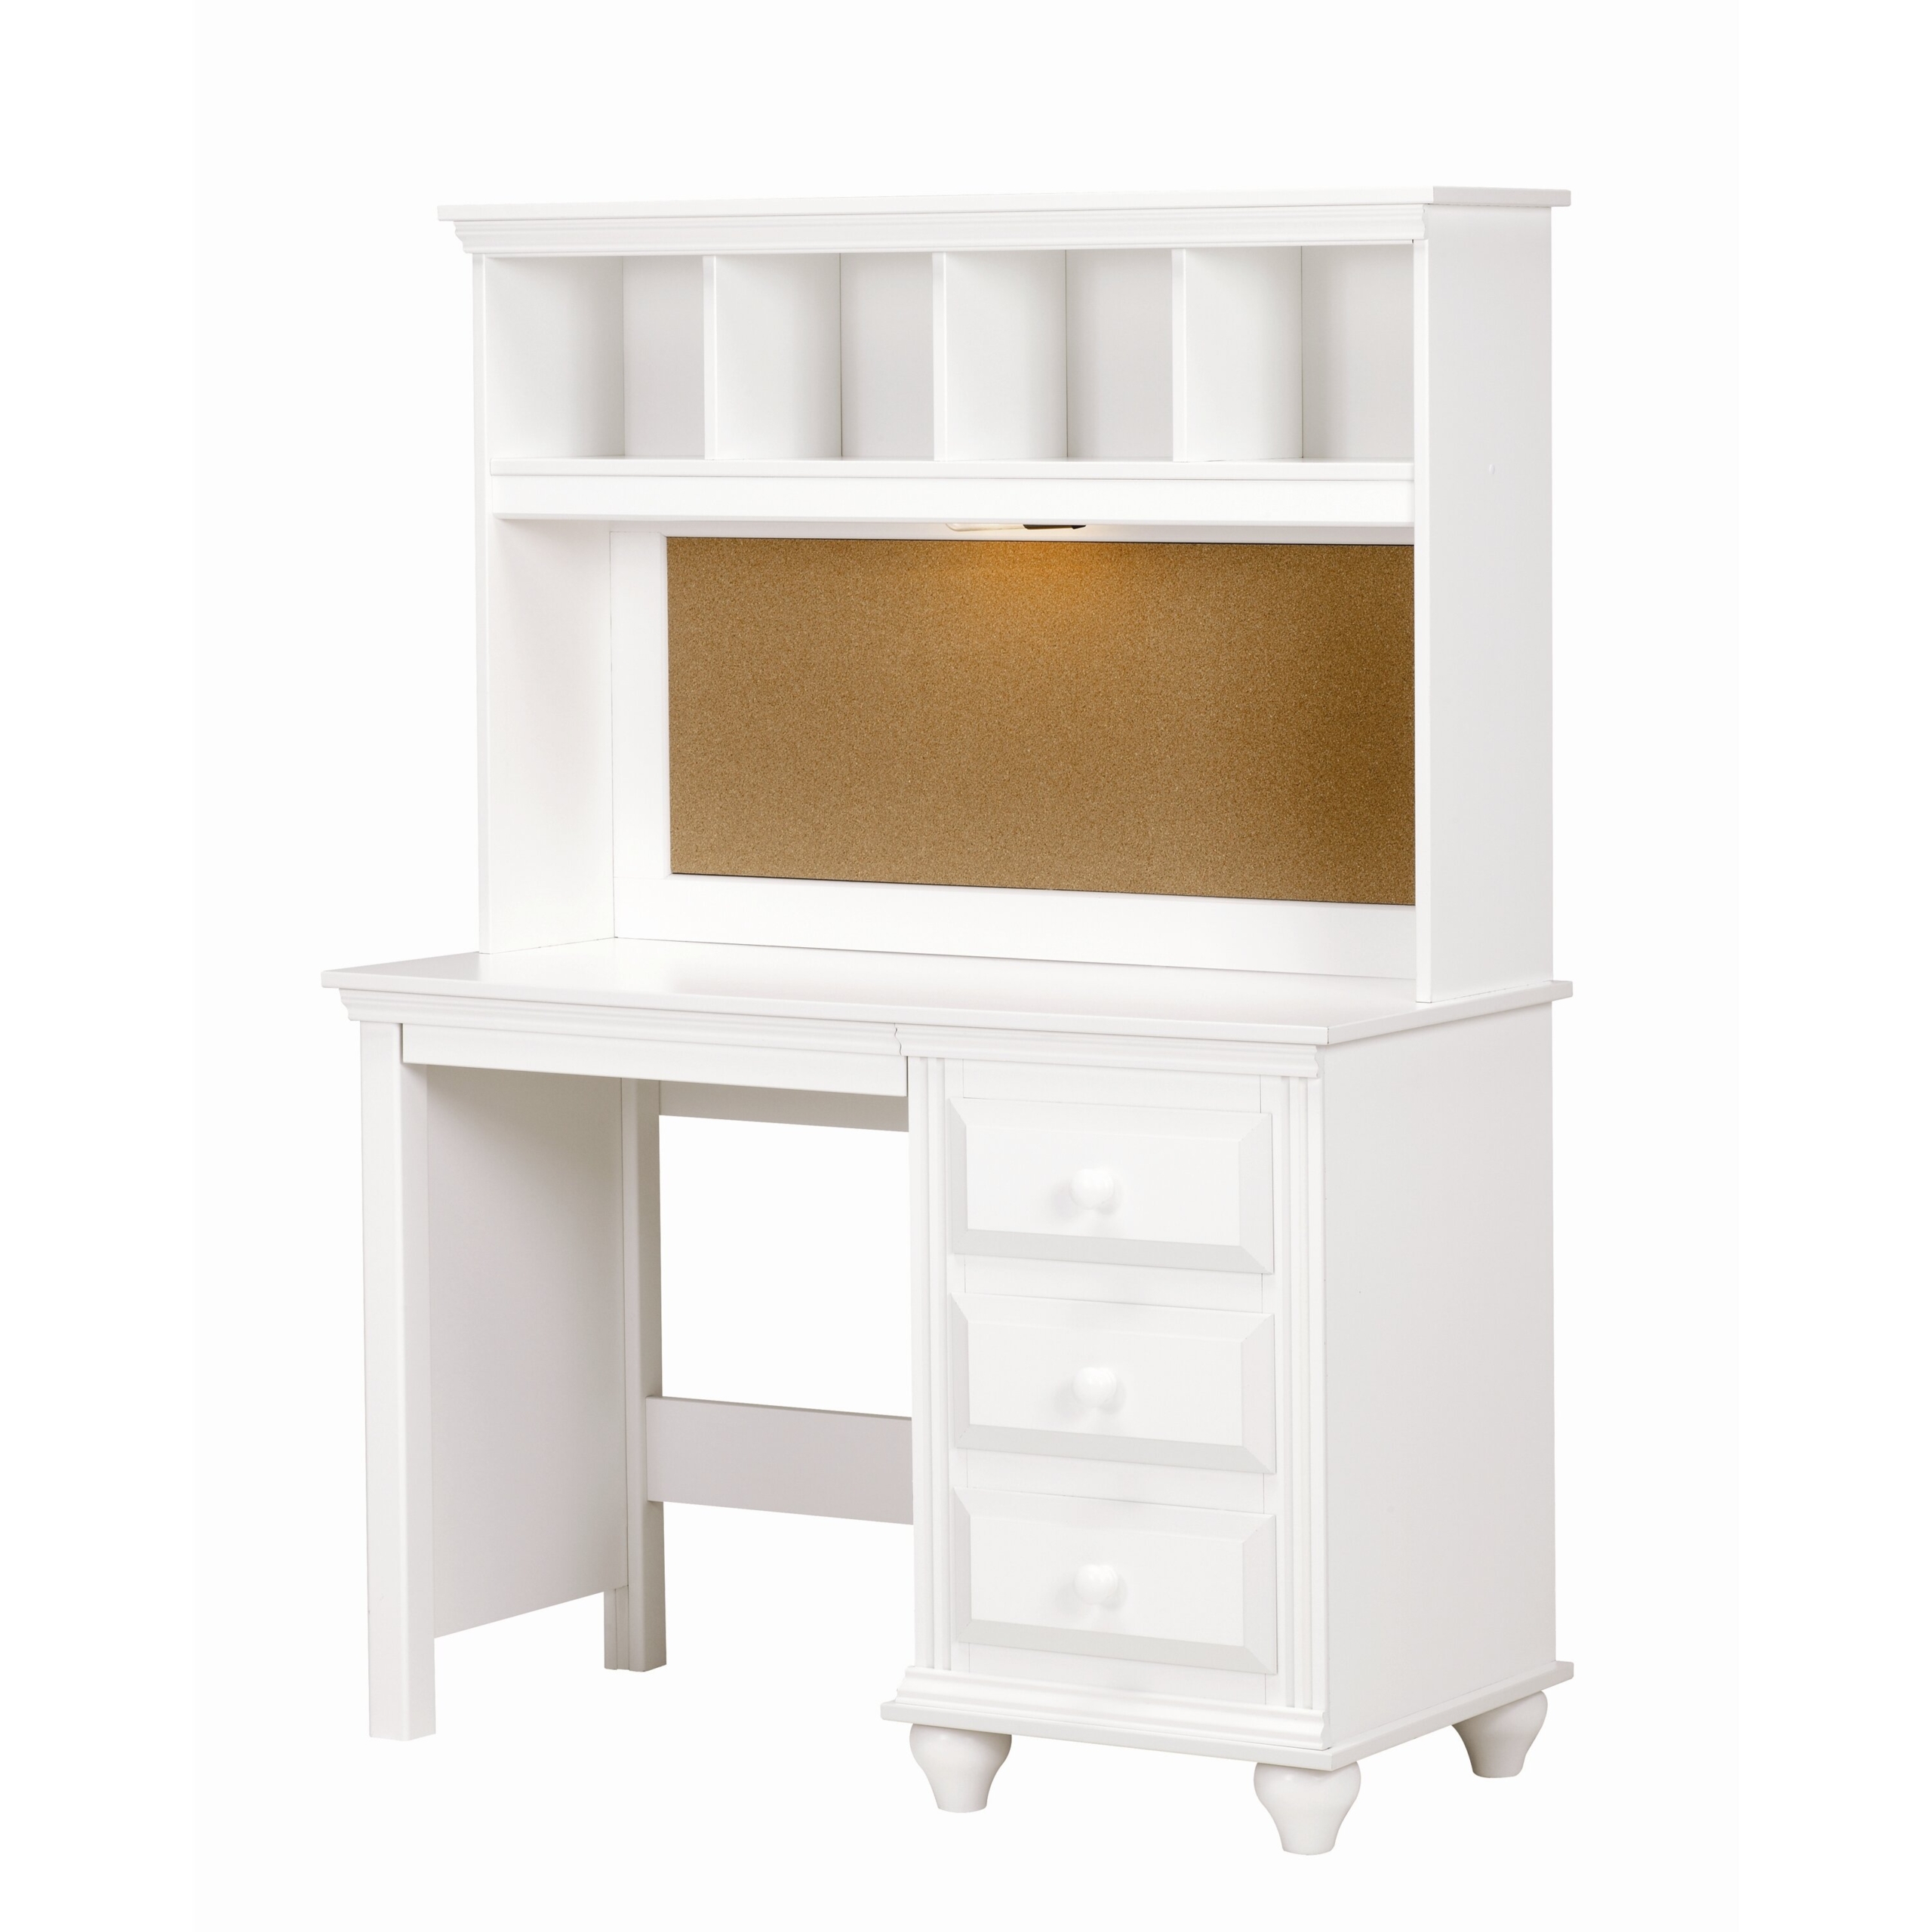 Lang furniture madison desk hutch with light 12 by 45